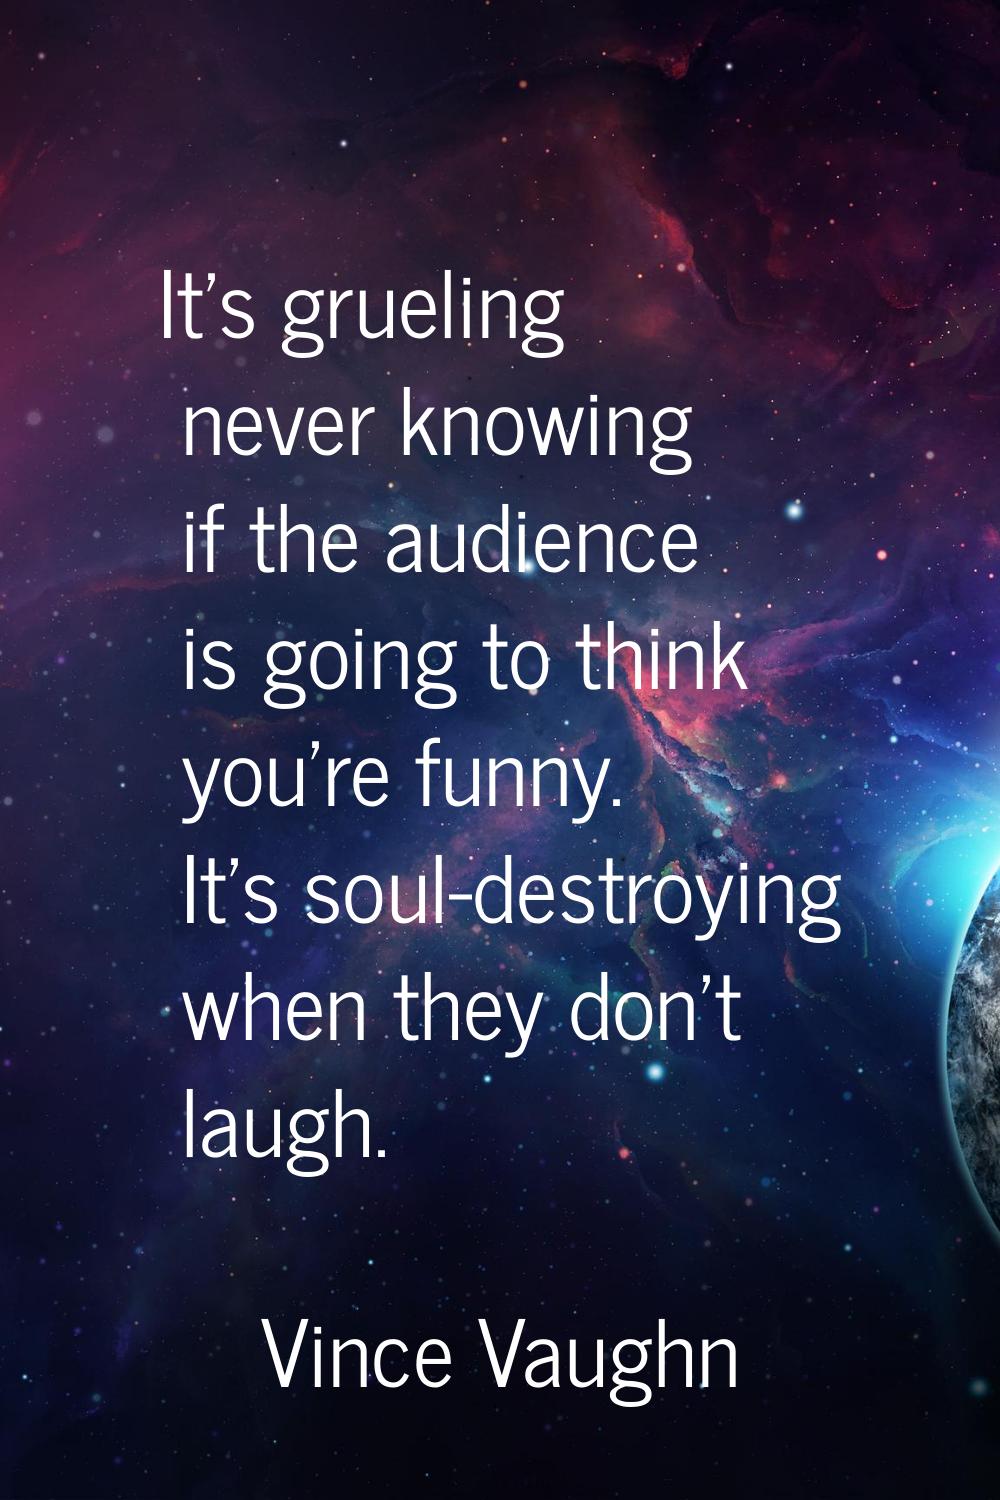 It's grueling never knowing if the audience is going to think you're funny. It's soul-destroying wh